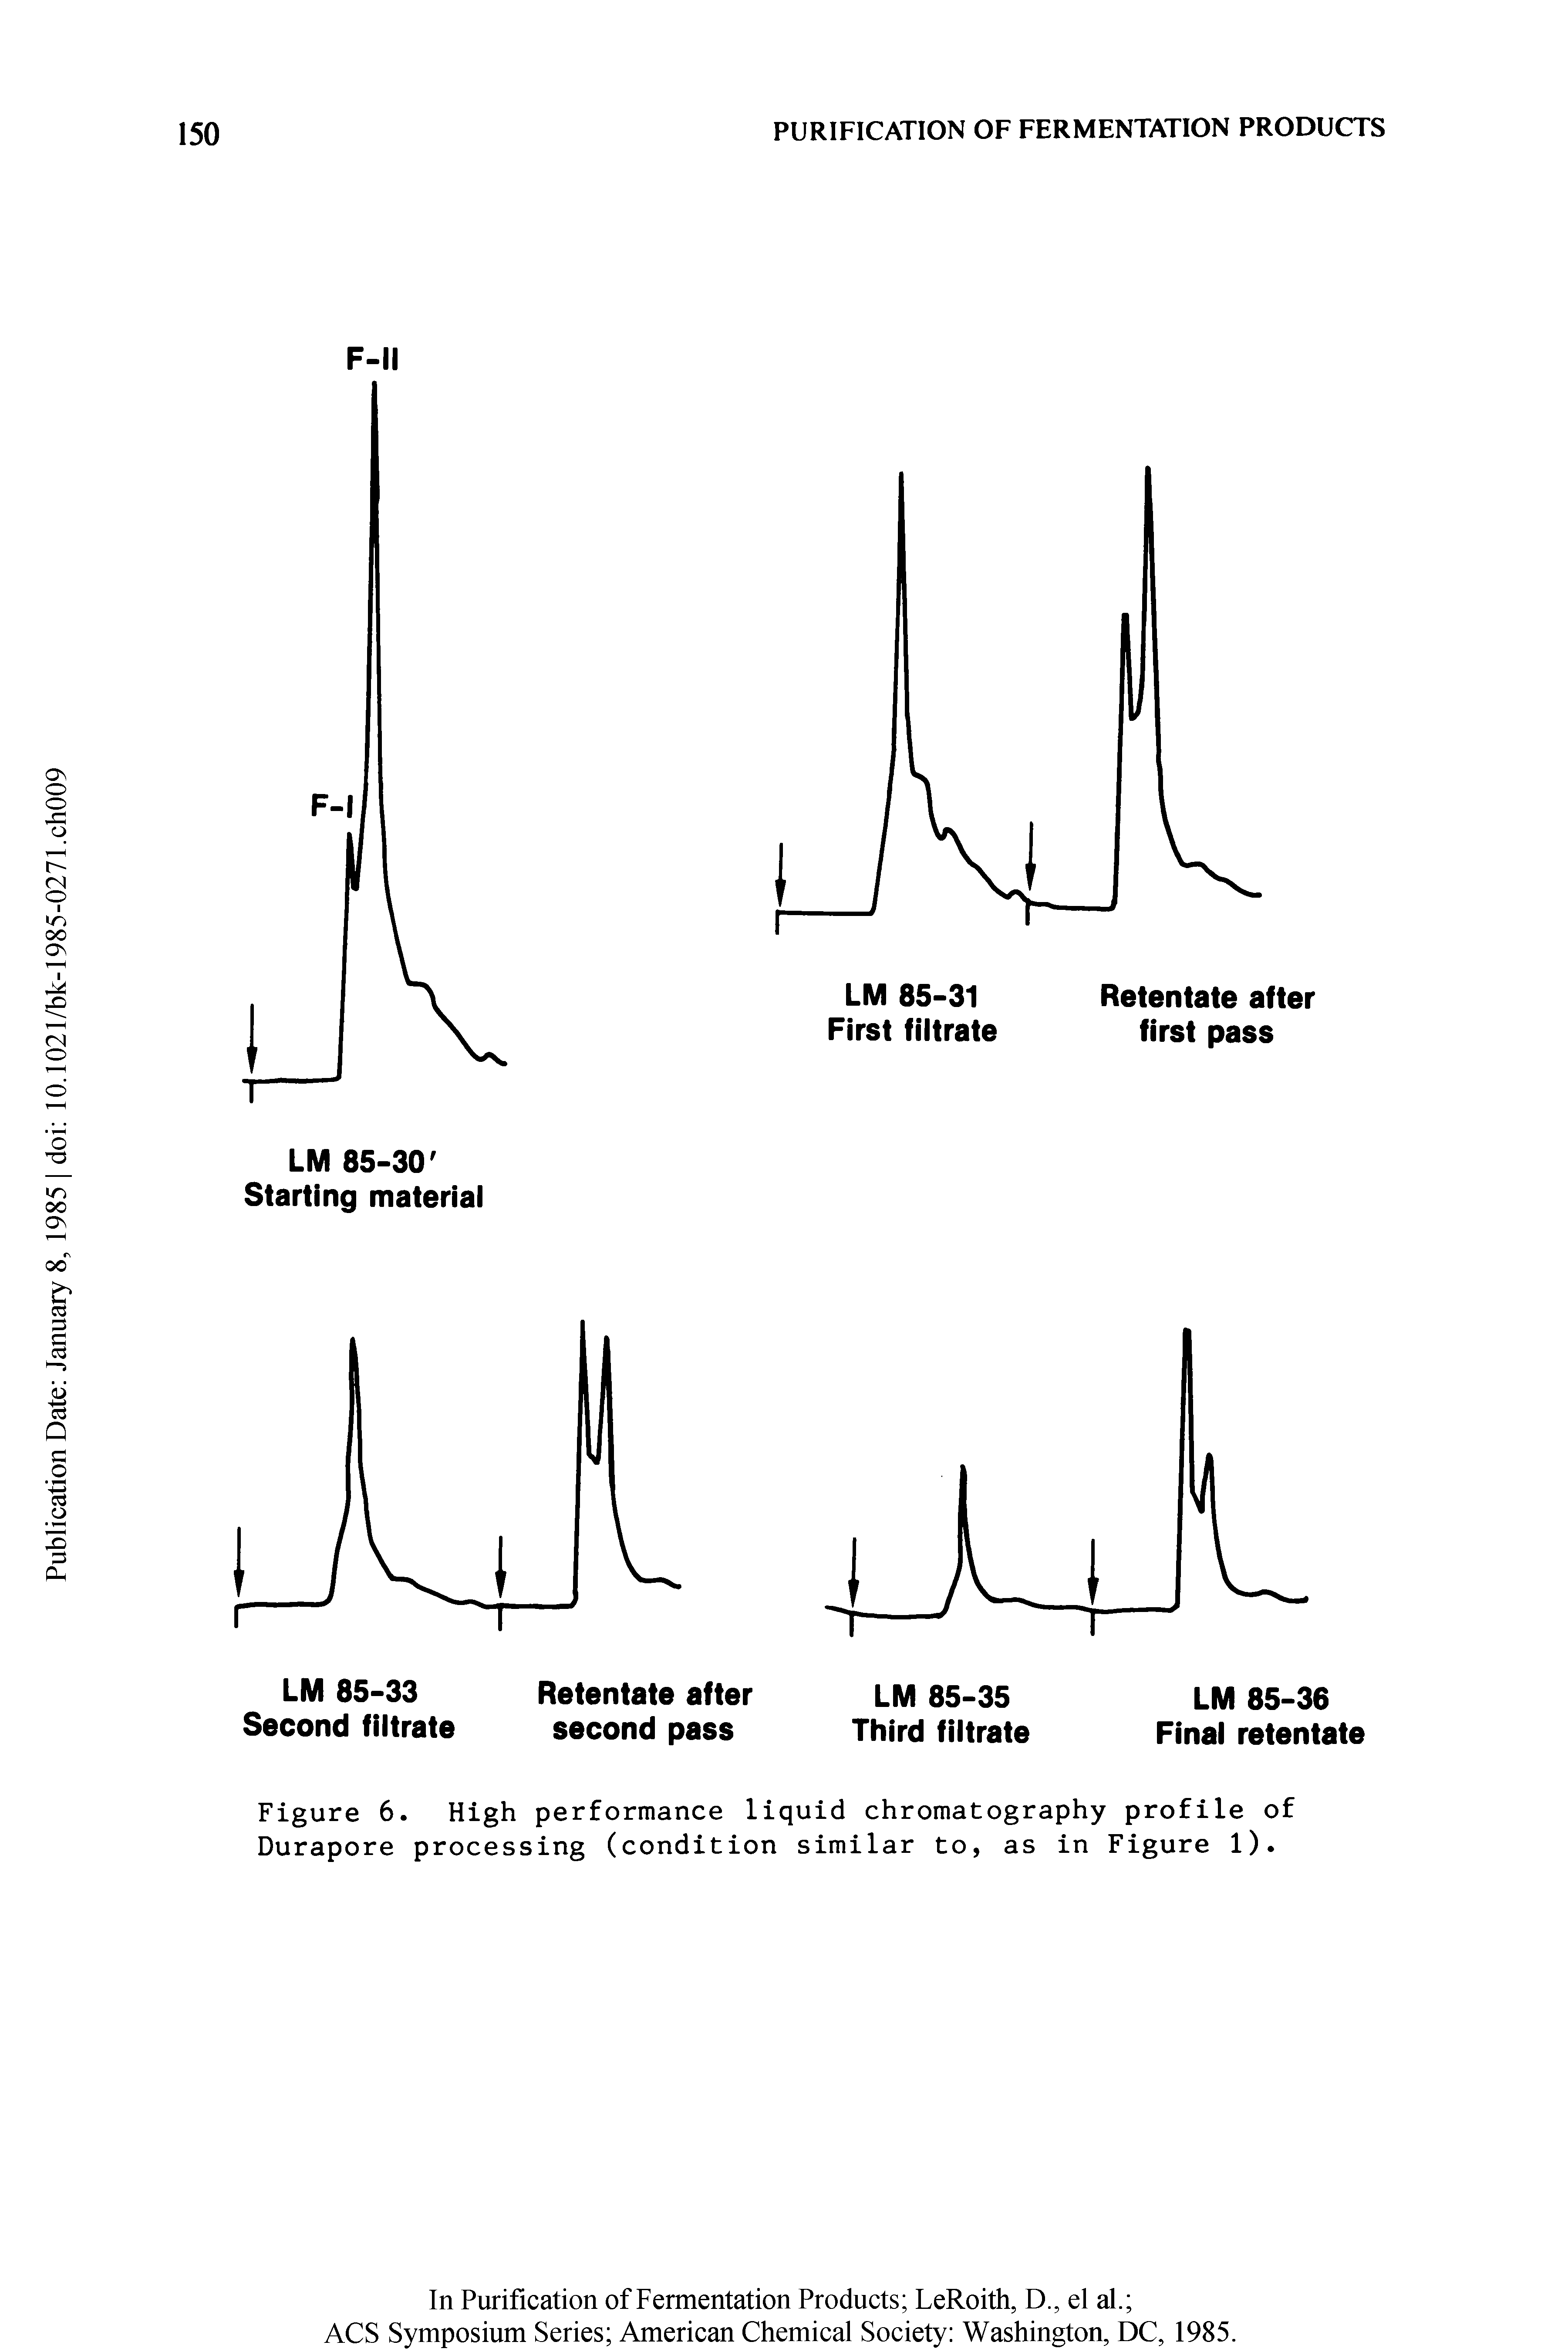 Figure 6. High performance liquid chromatography profile of Durapore processing (condition similar to, as in Figure 1).